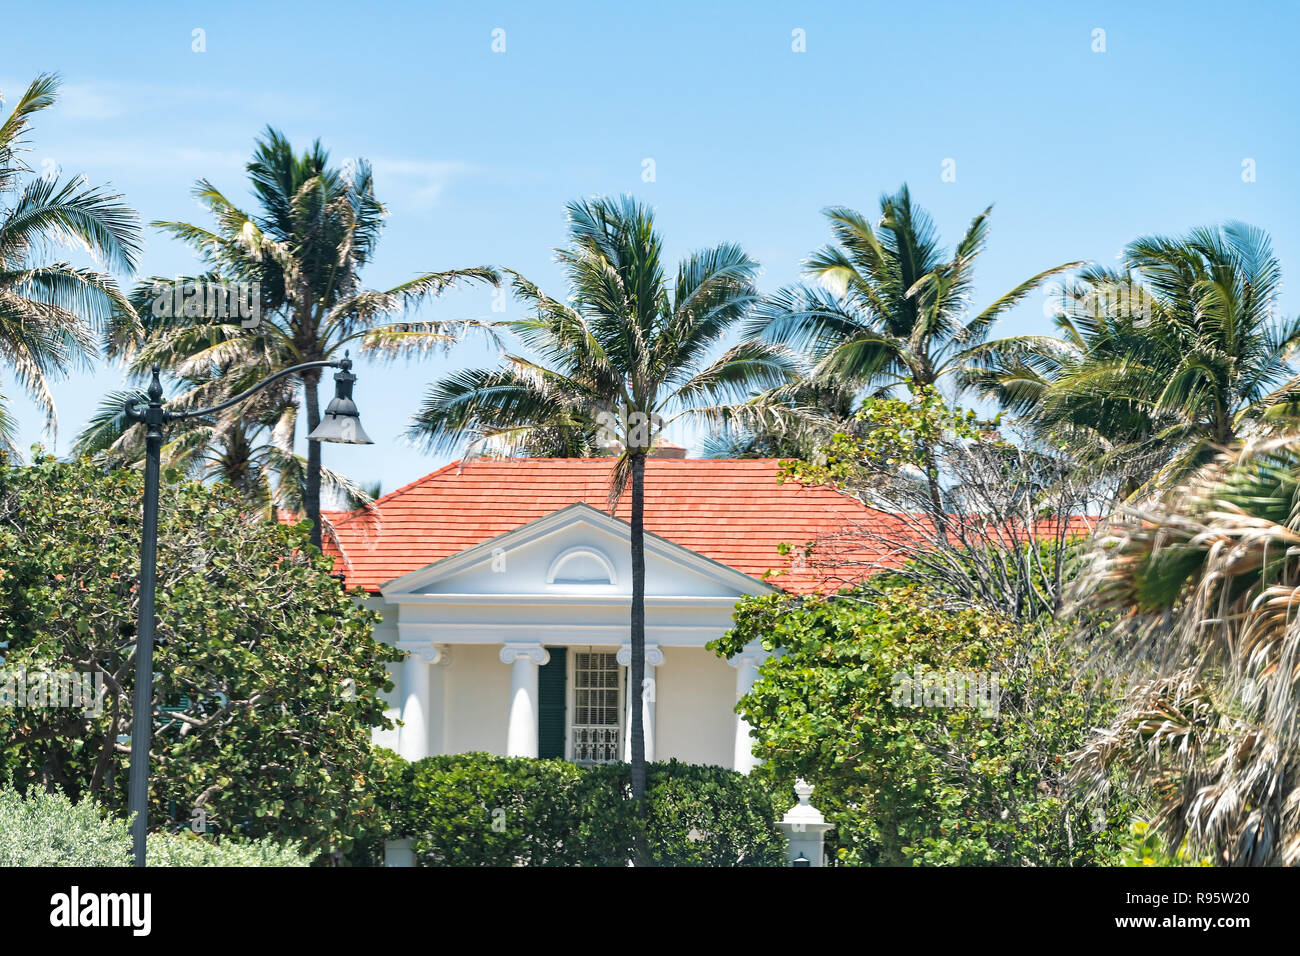 Palm Beach, USA - May 9, 2018: Mar-a-lago, mar a lago architecture, closeup of resort building, presidential residence of Donald J Trump, american pre Stock Photo